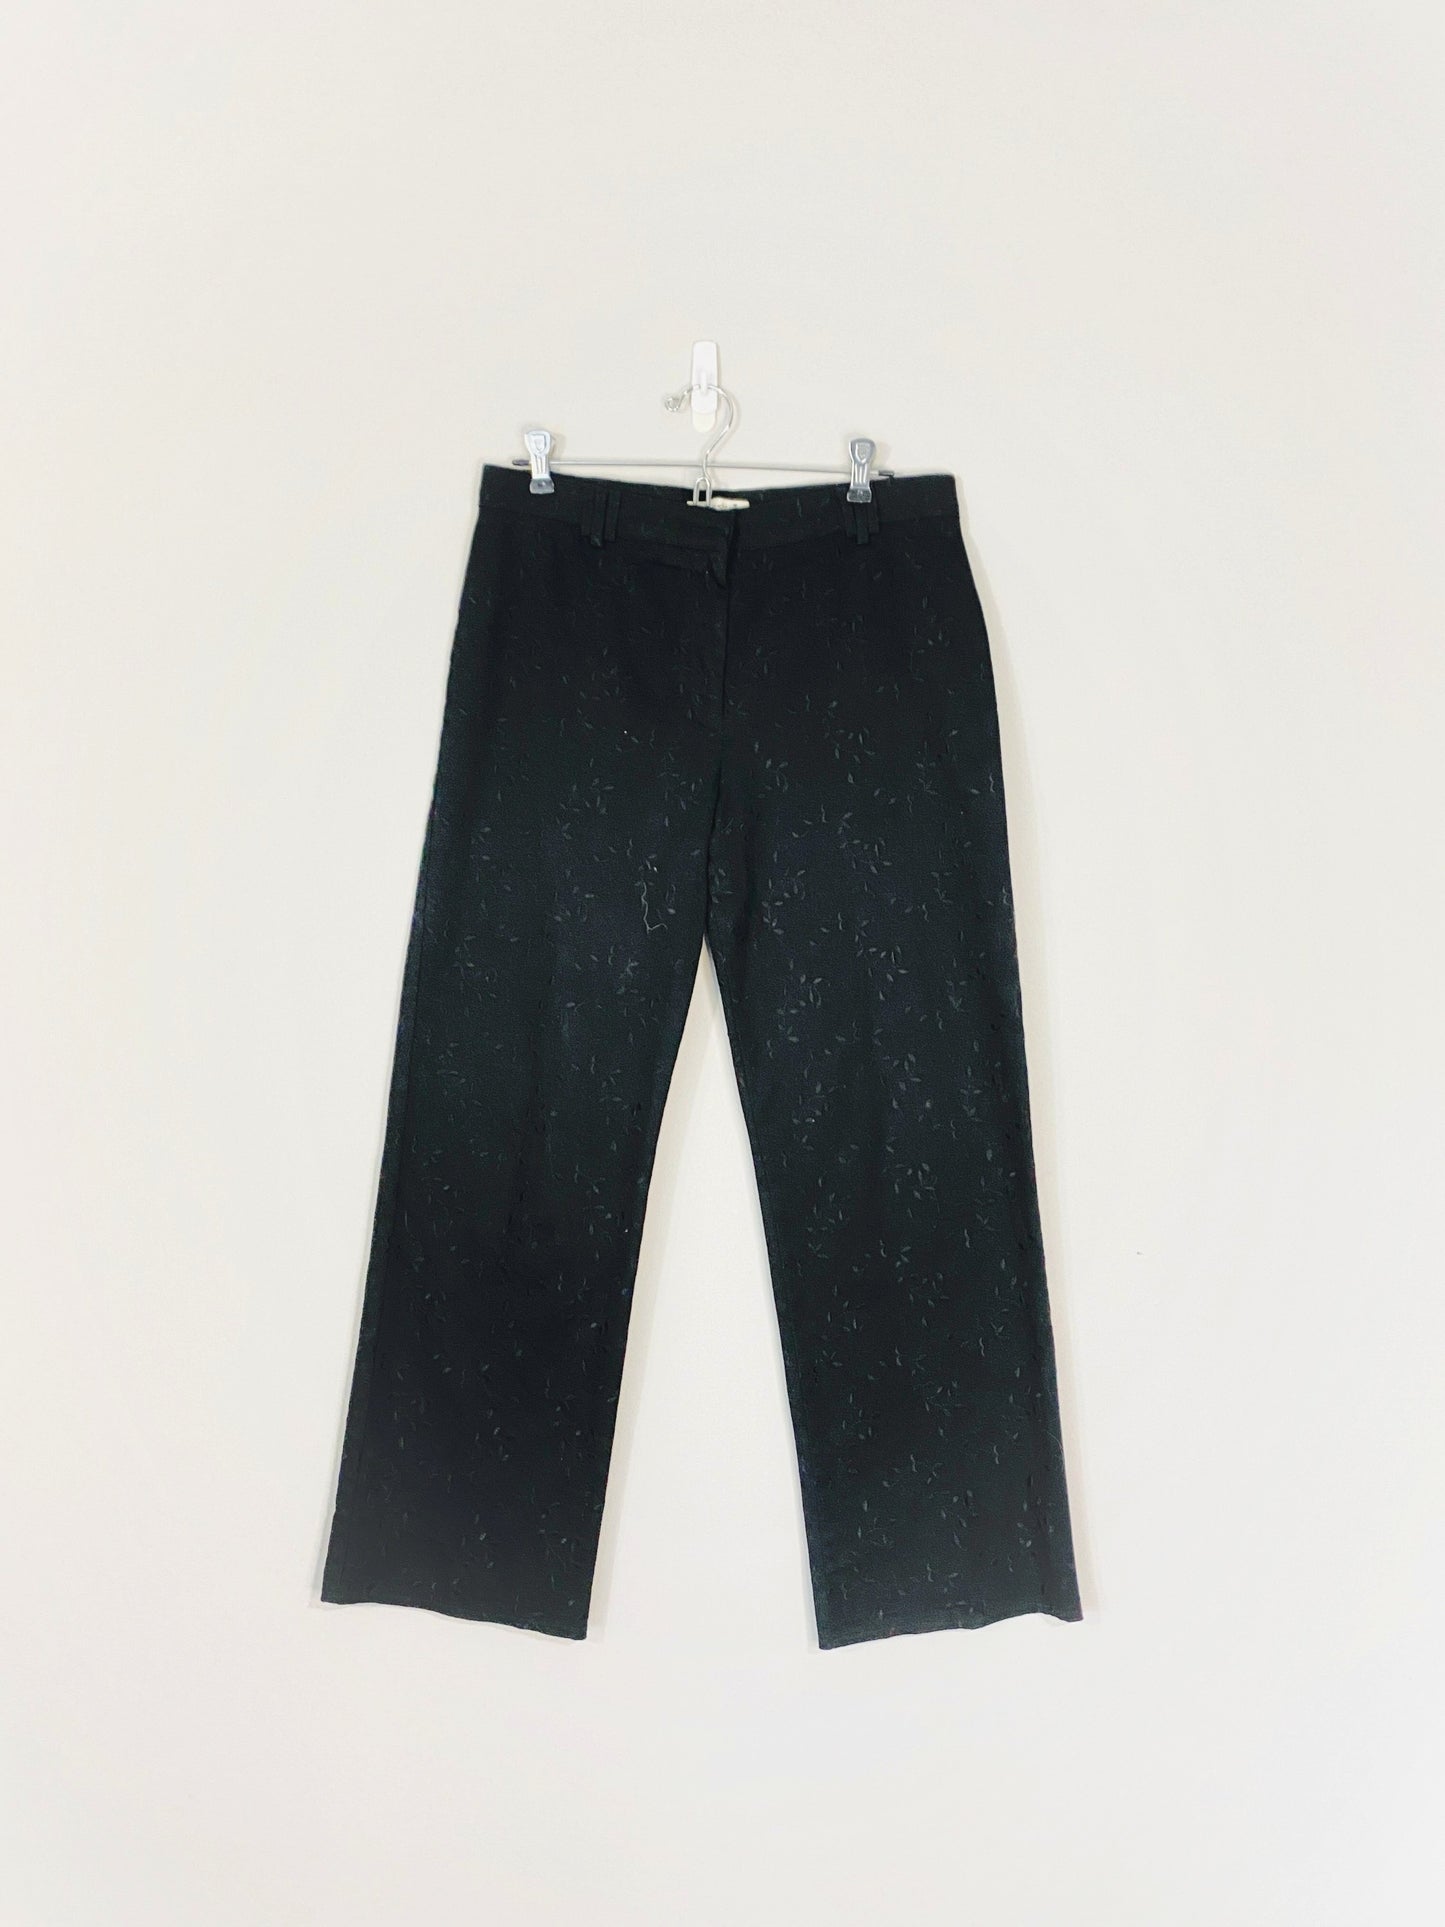 Black Embroidered Jeans (Size 12P)